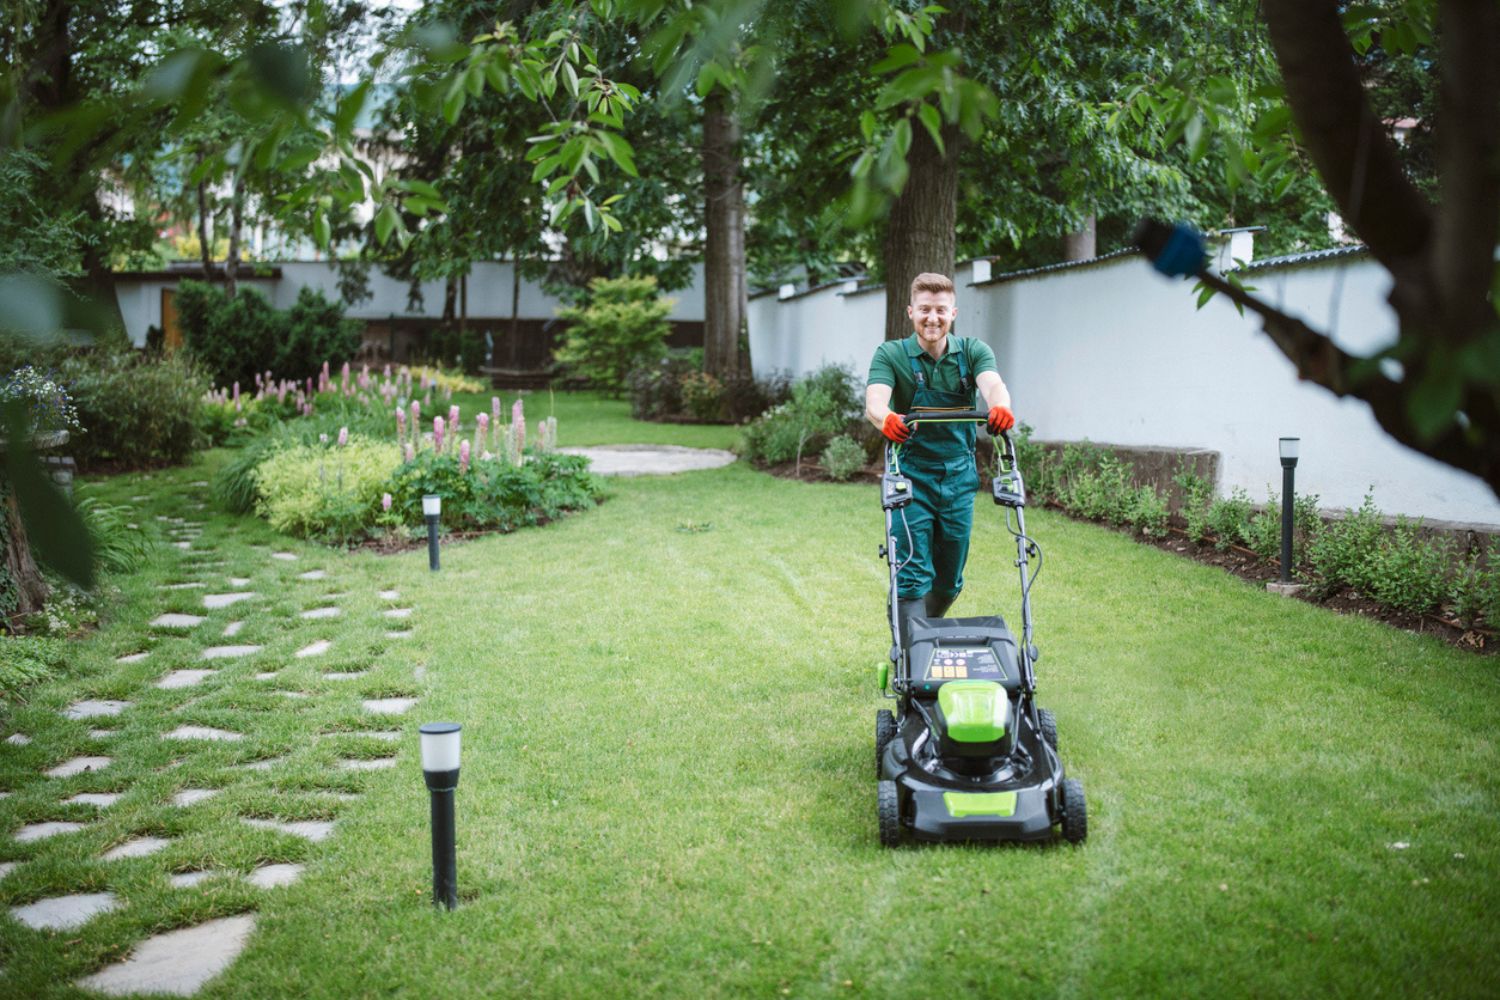 Do I Need a License for a Lawn Care Business?